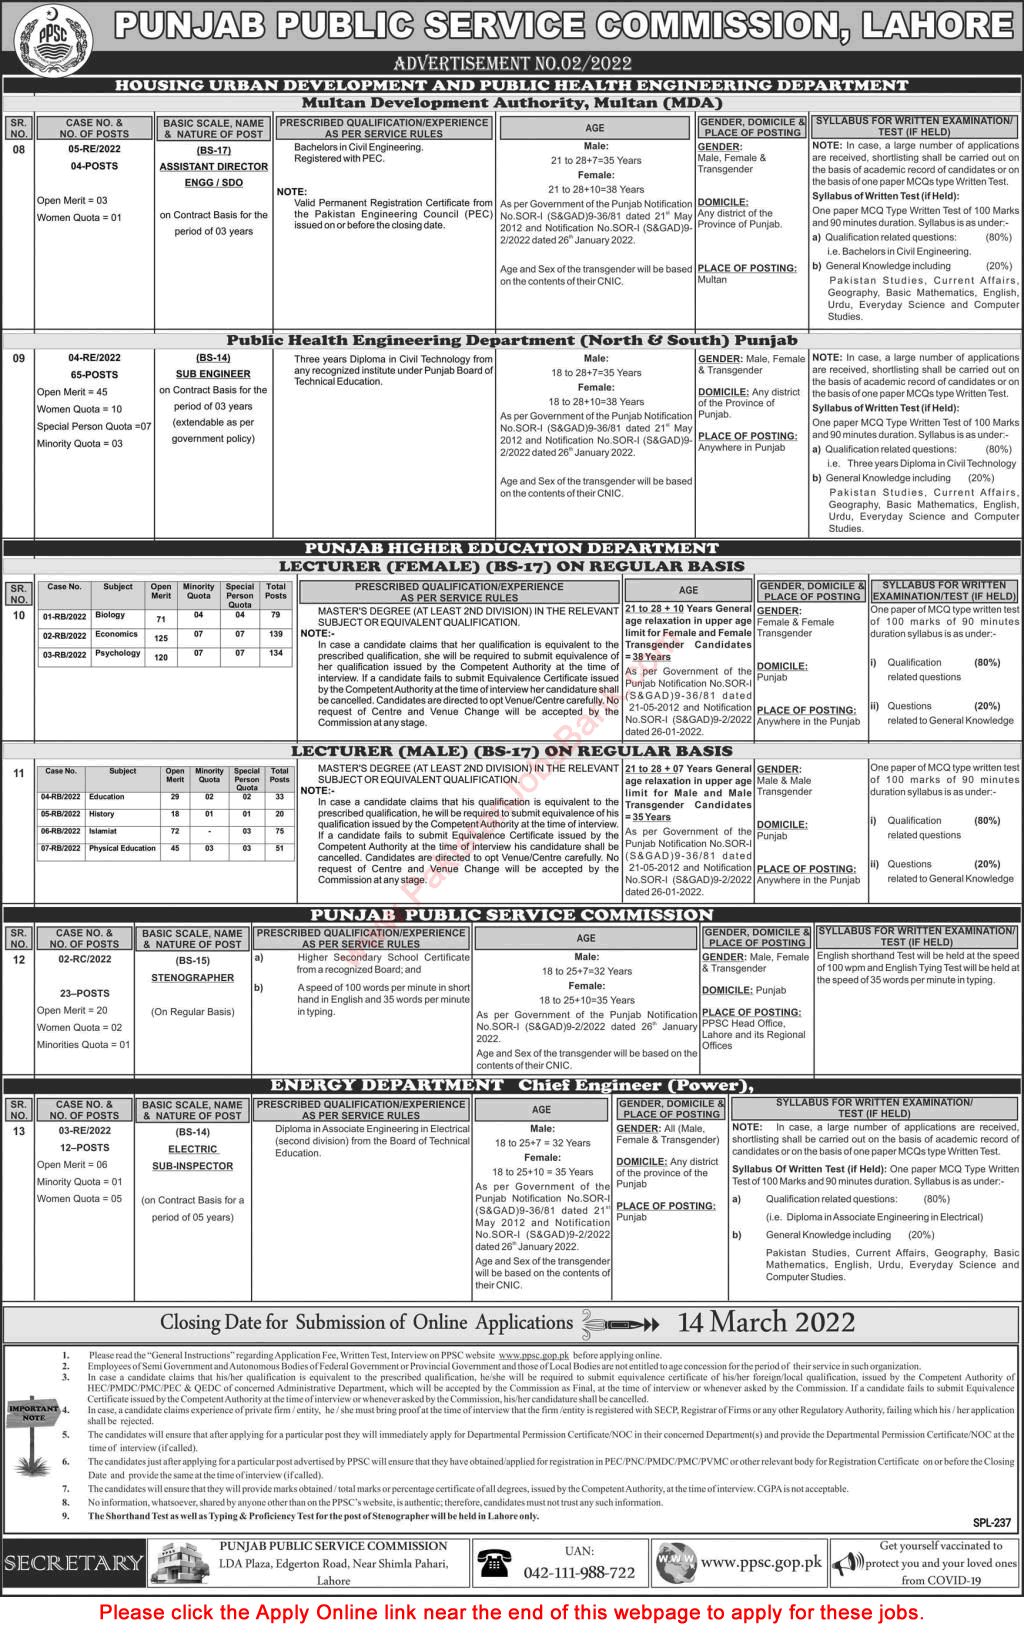 PPSC Jobs February 2022 Online Apply Consolidated Advertisement No 02/2022 Latest